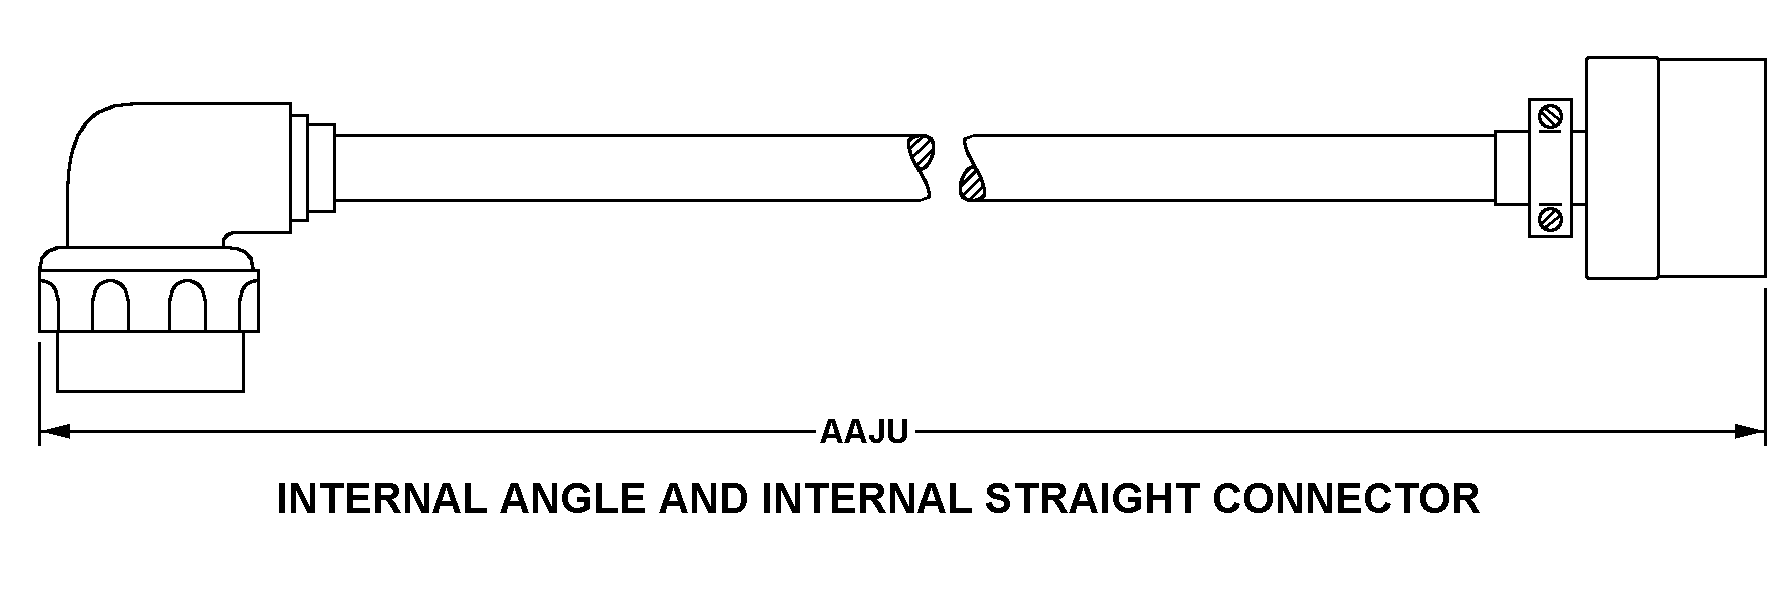 INTERNAL ANGLE AND INTERNAL STRAIGHT CONNECTOR style nsn 5995-01-428-2564